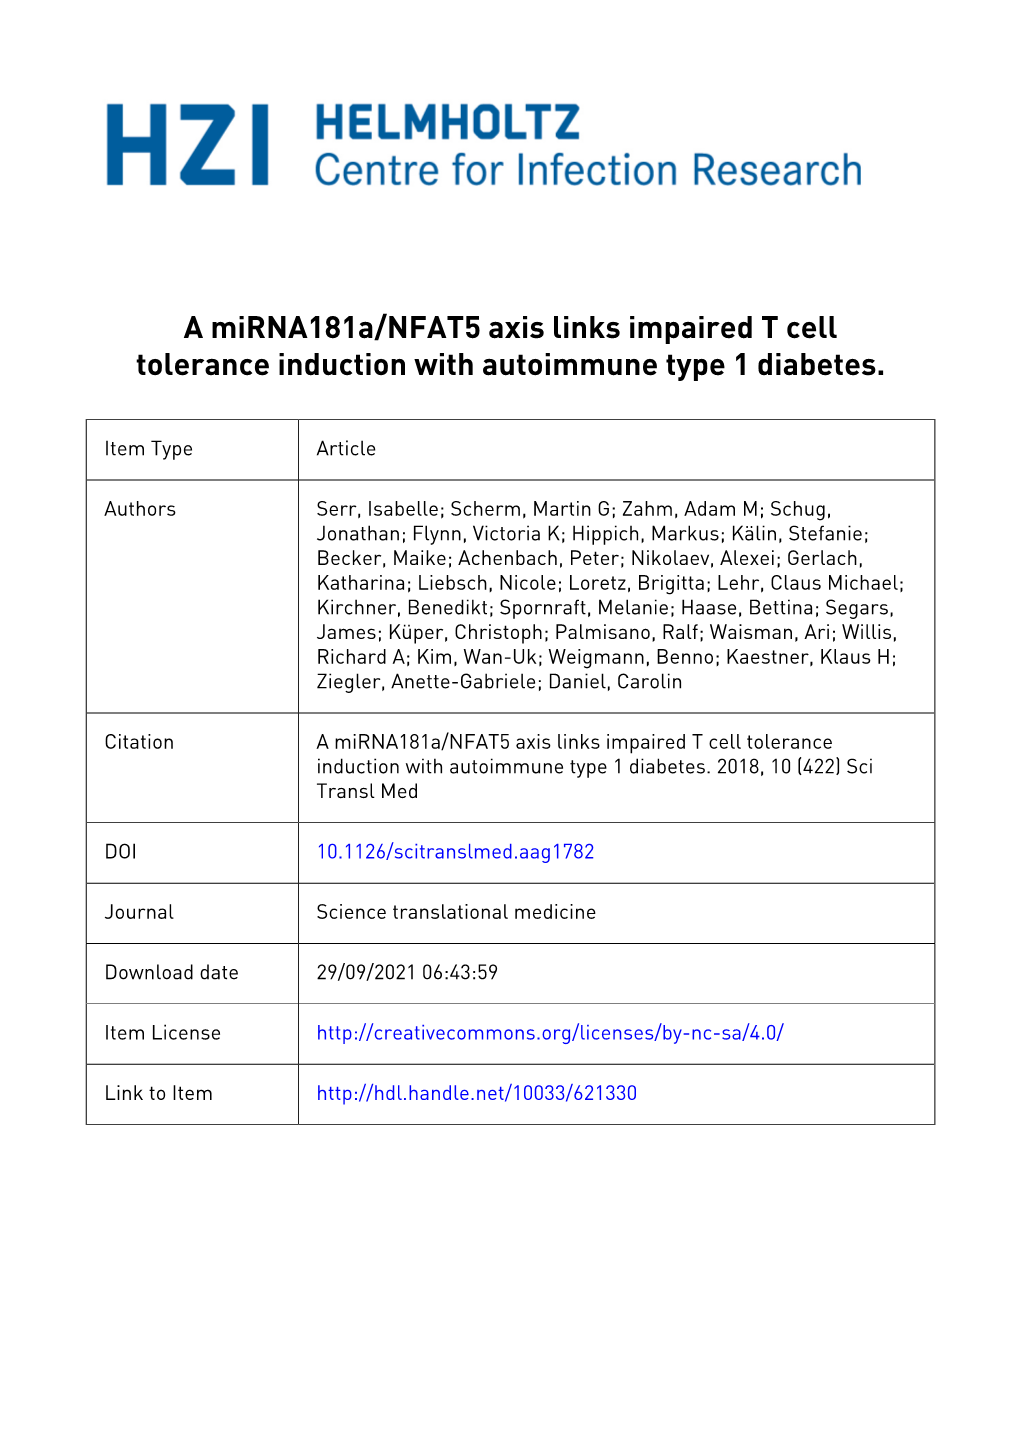 A Mirna181a/NFAT5 Axis Links Impaired T Cell Tolerance Induction with Autoimmune Type 1 Diabetes